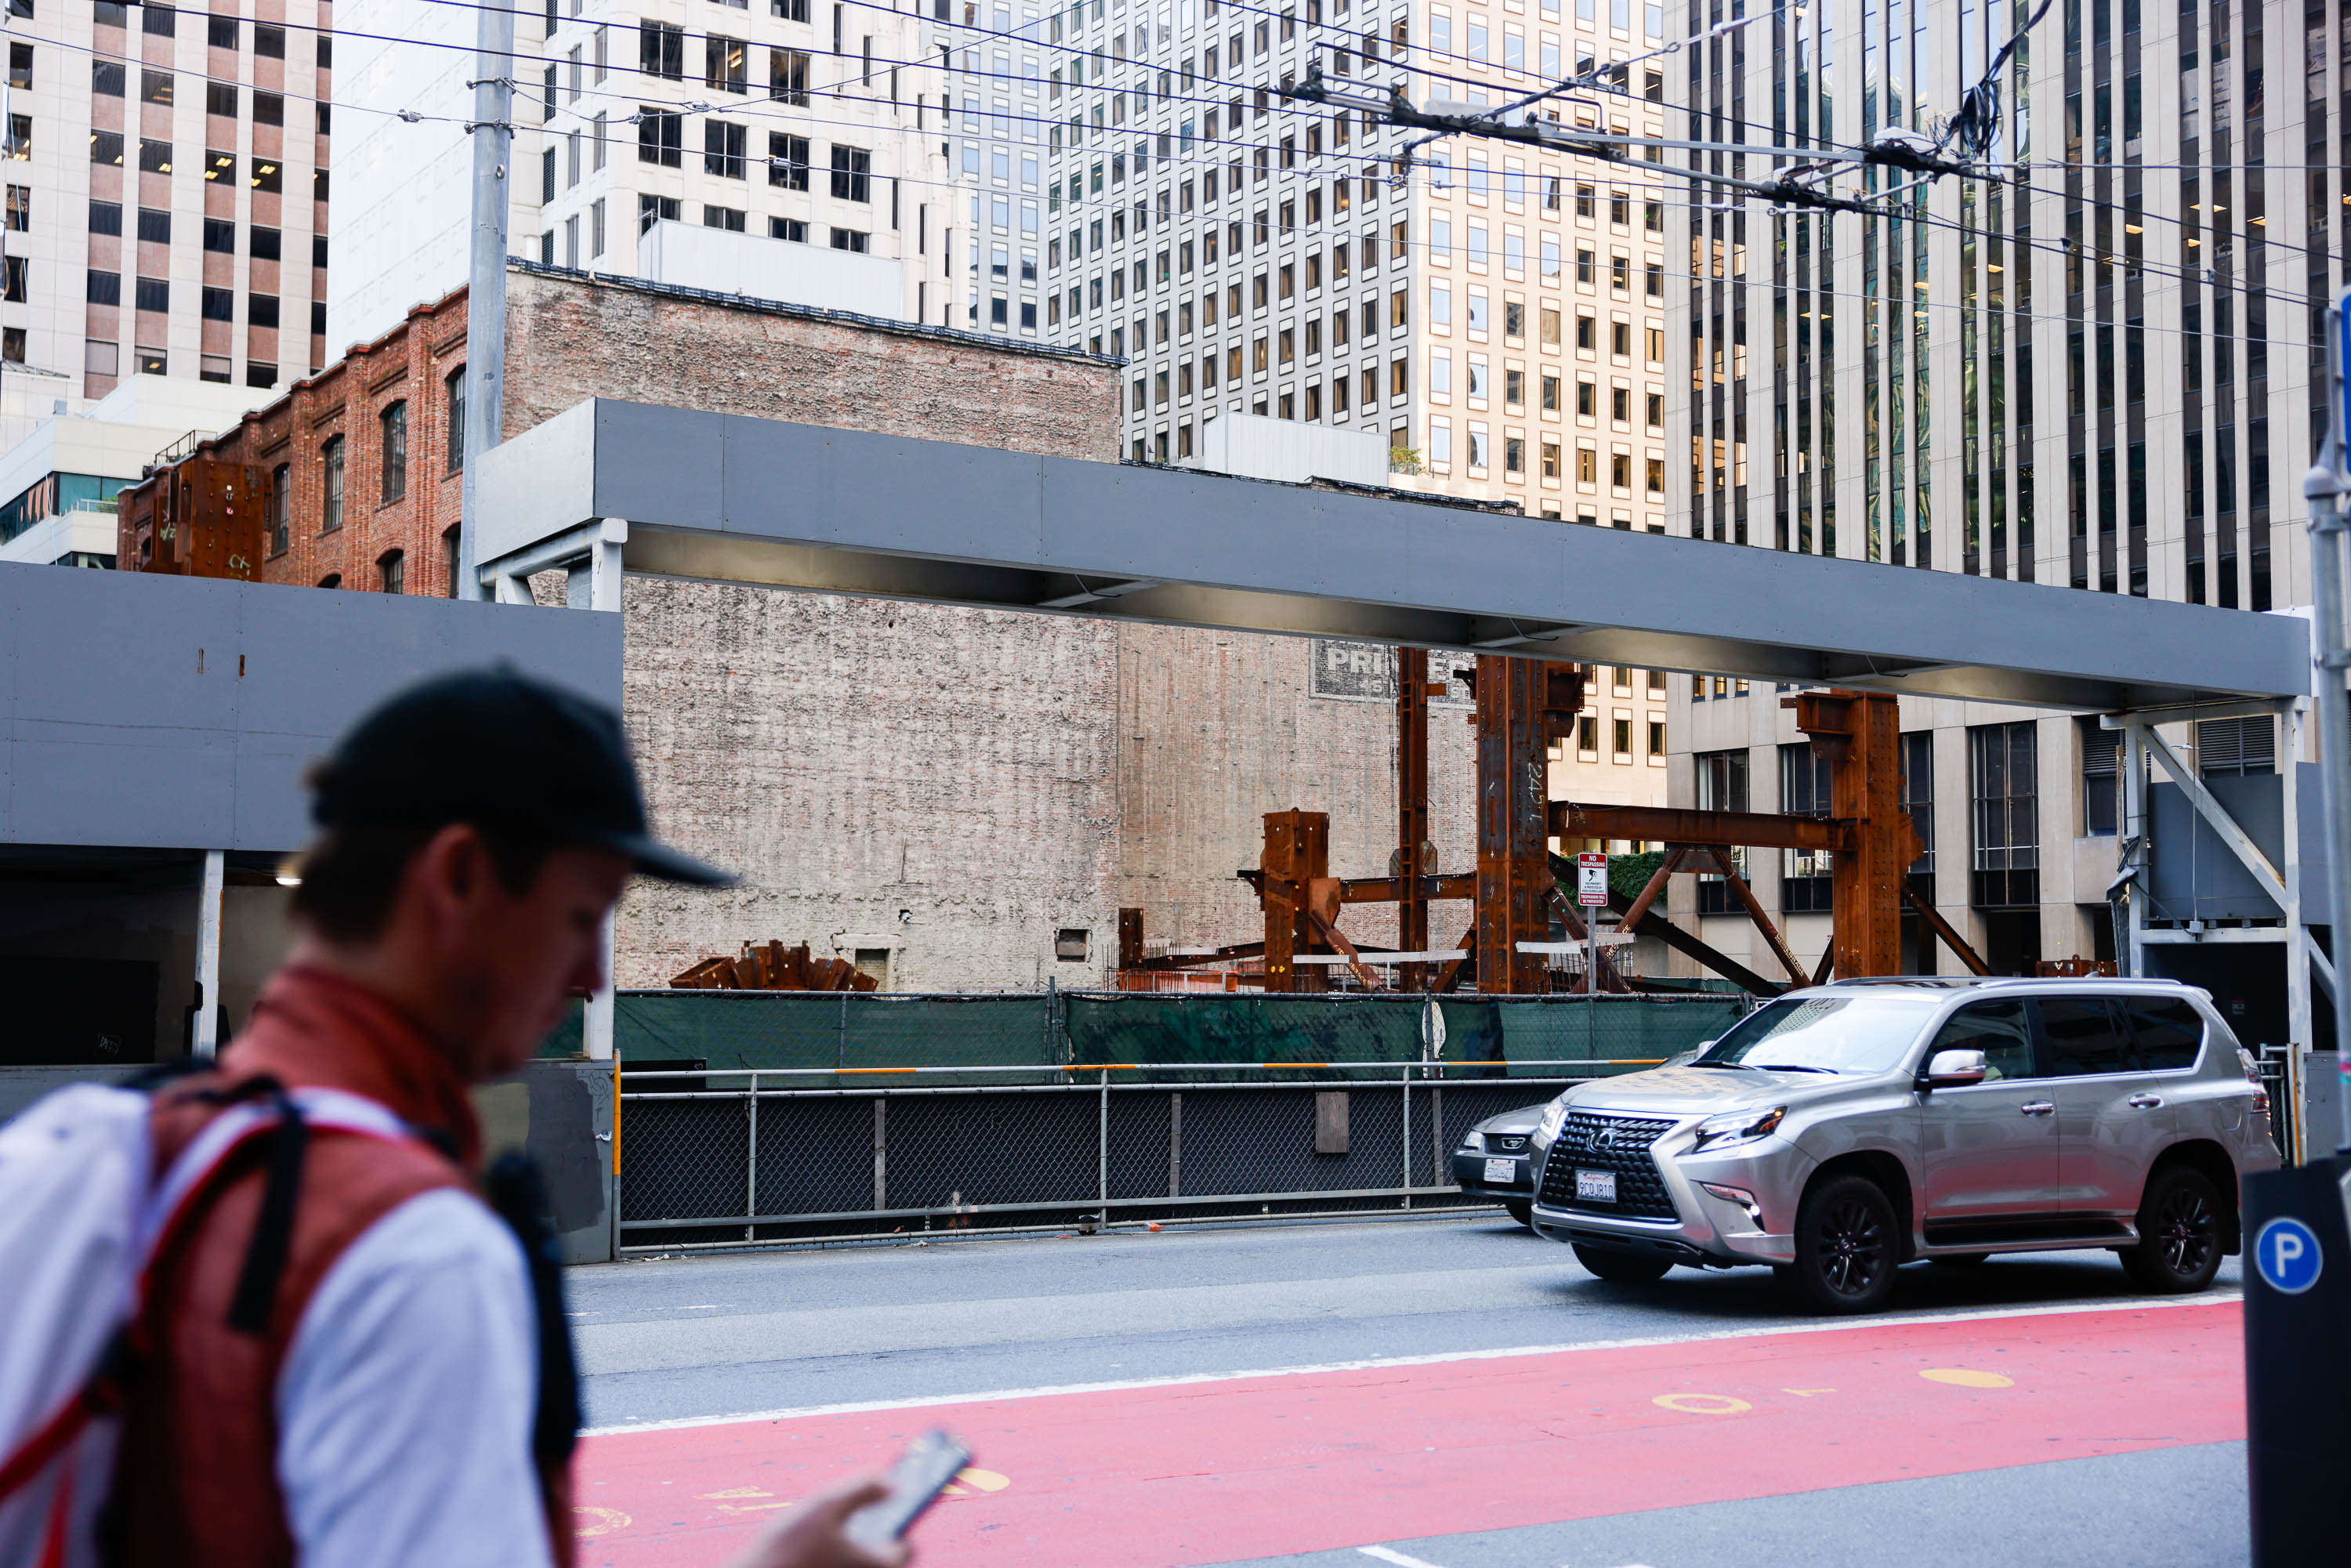 An urban construction site with exposed steel beams, surrounded by a mix of old and modern buildings, a walking man in foreground, and cars on the street.